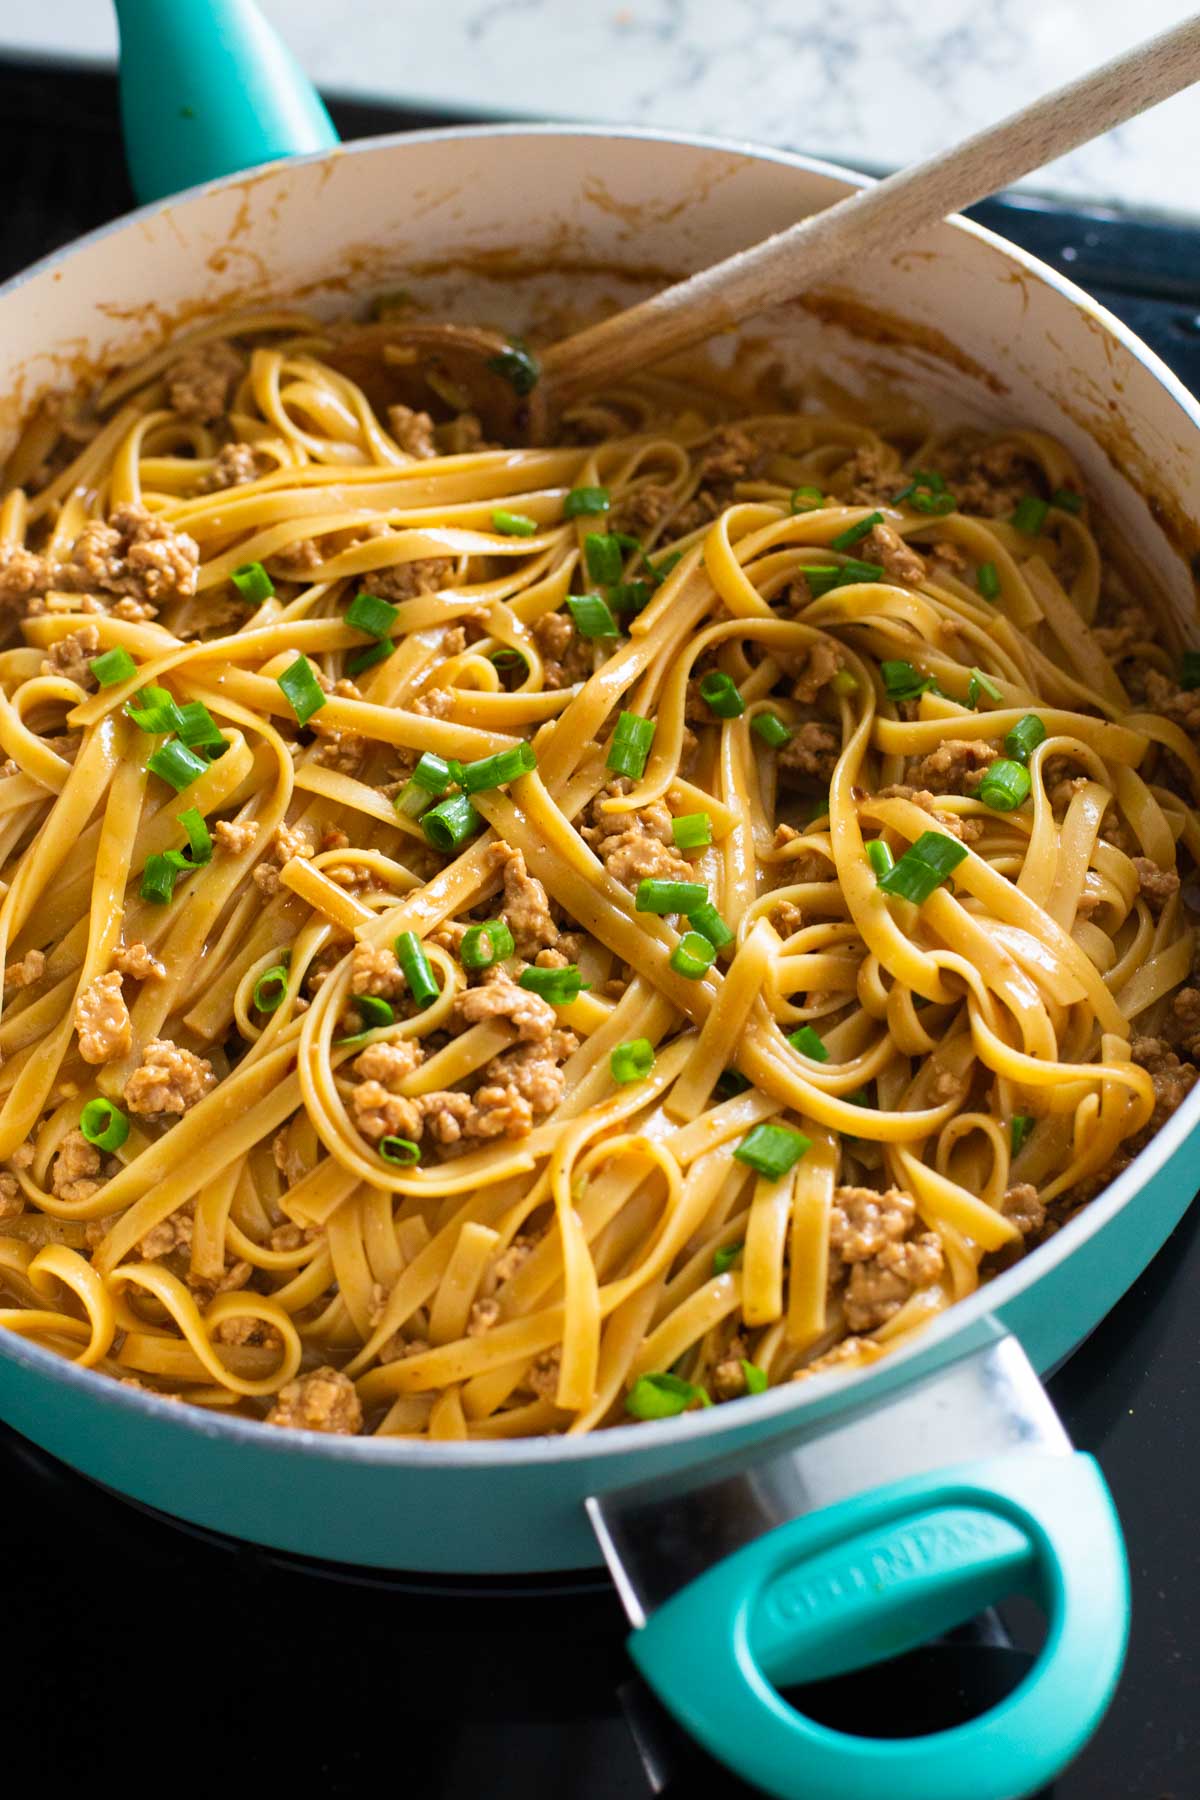 A pan filled with the finished peanut butter noodles topped with green onions.